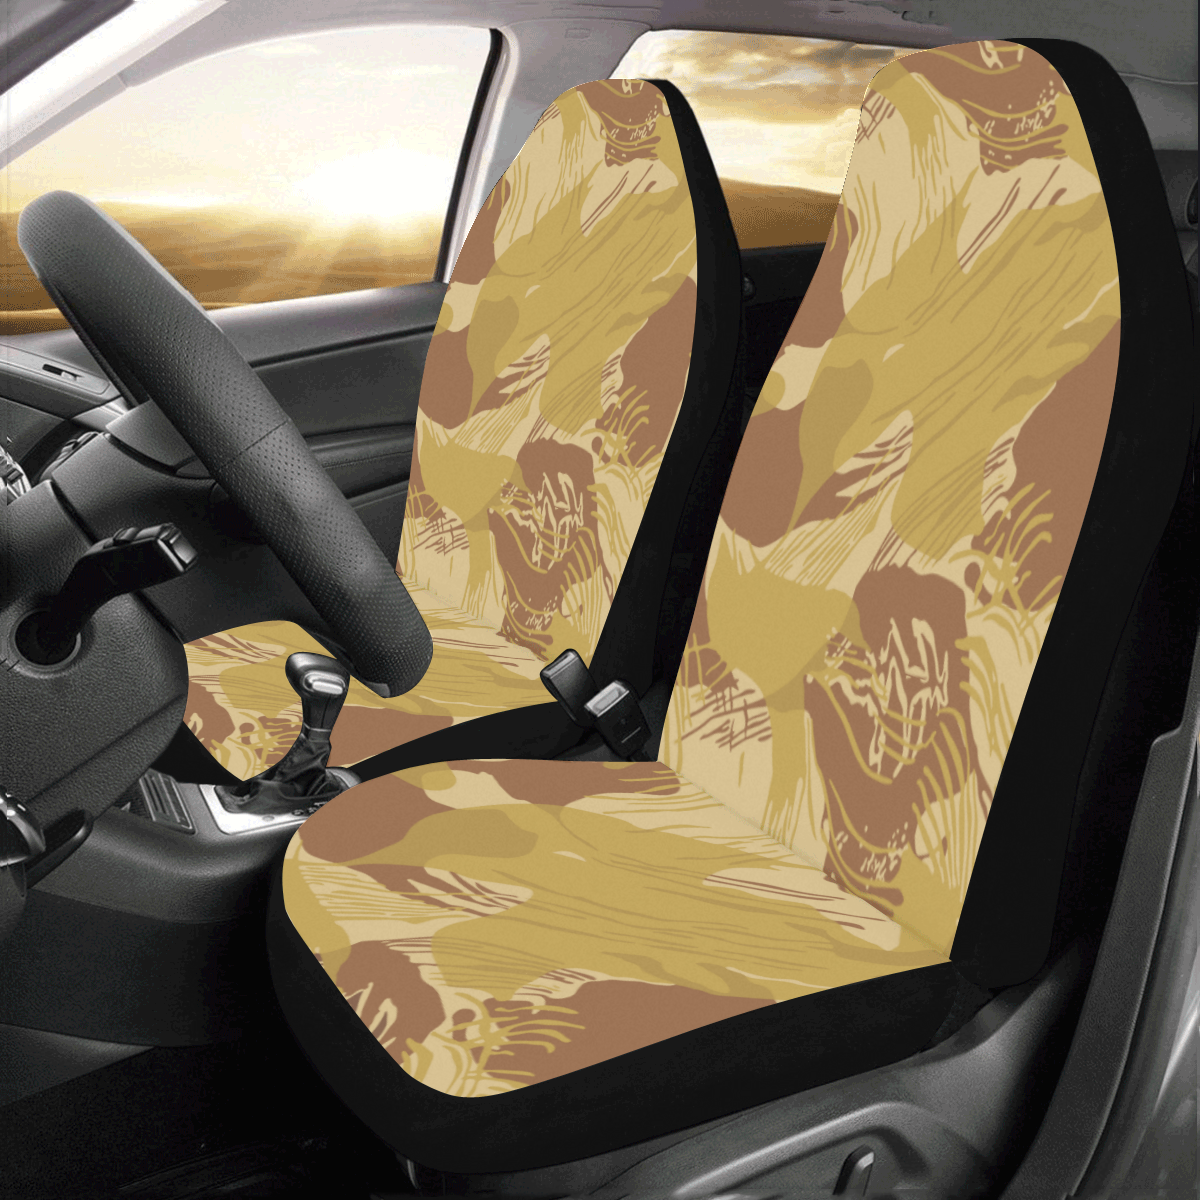 rhodesian experimental desert camouflage Car Seat Covers (Set of 2)